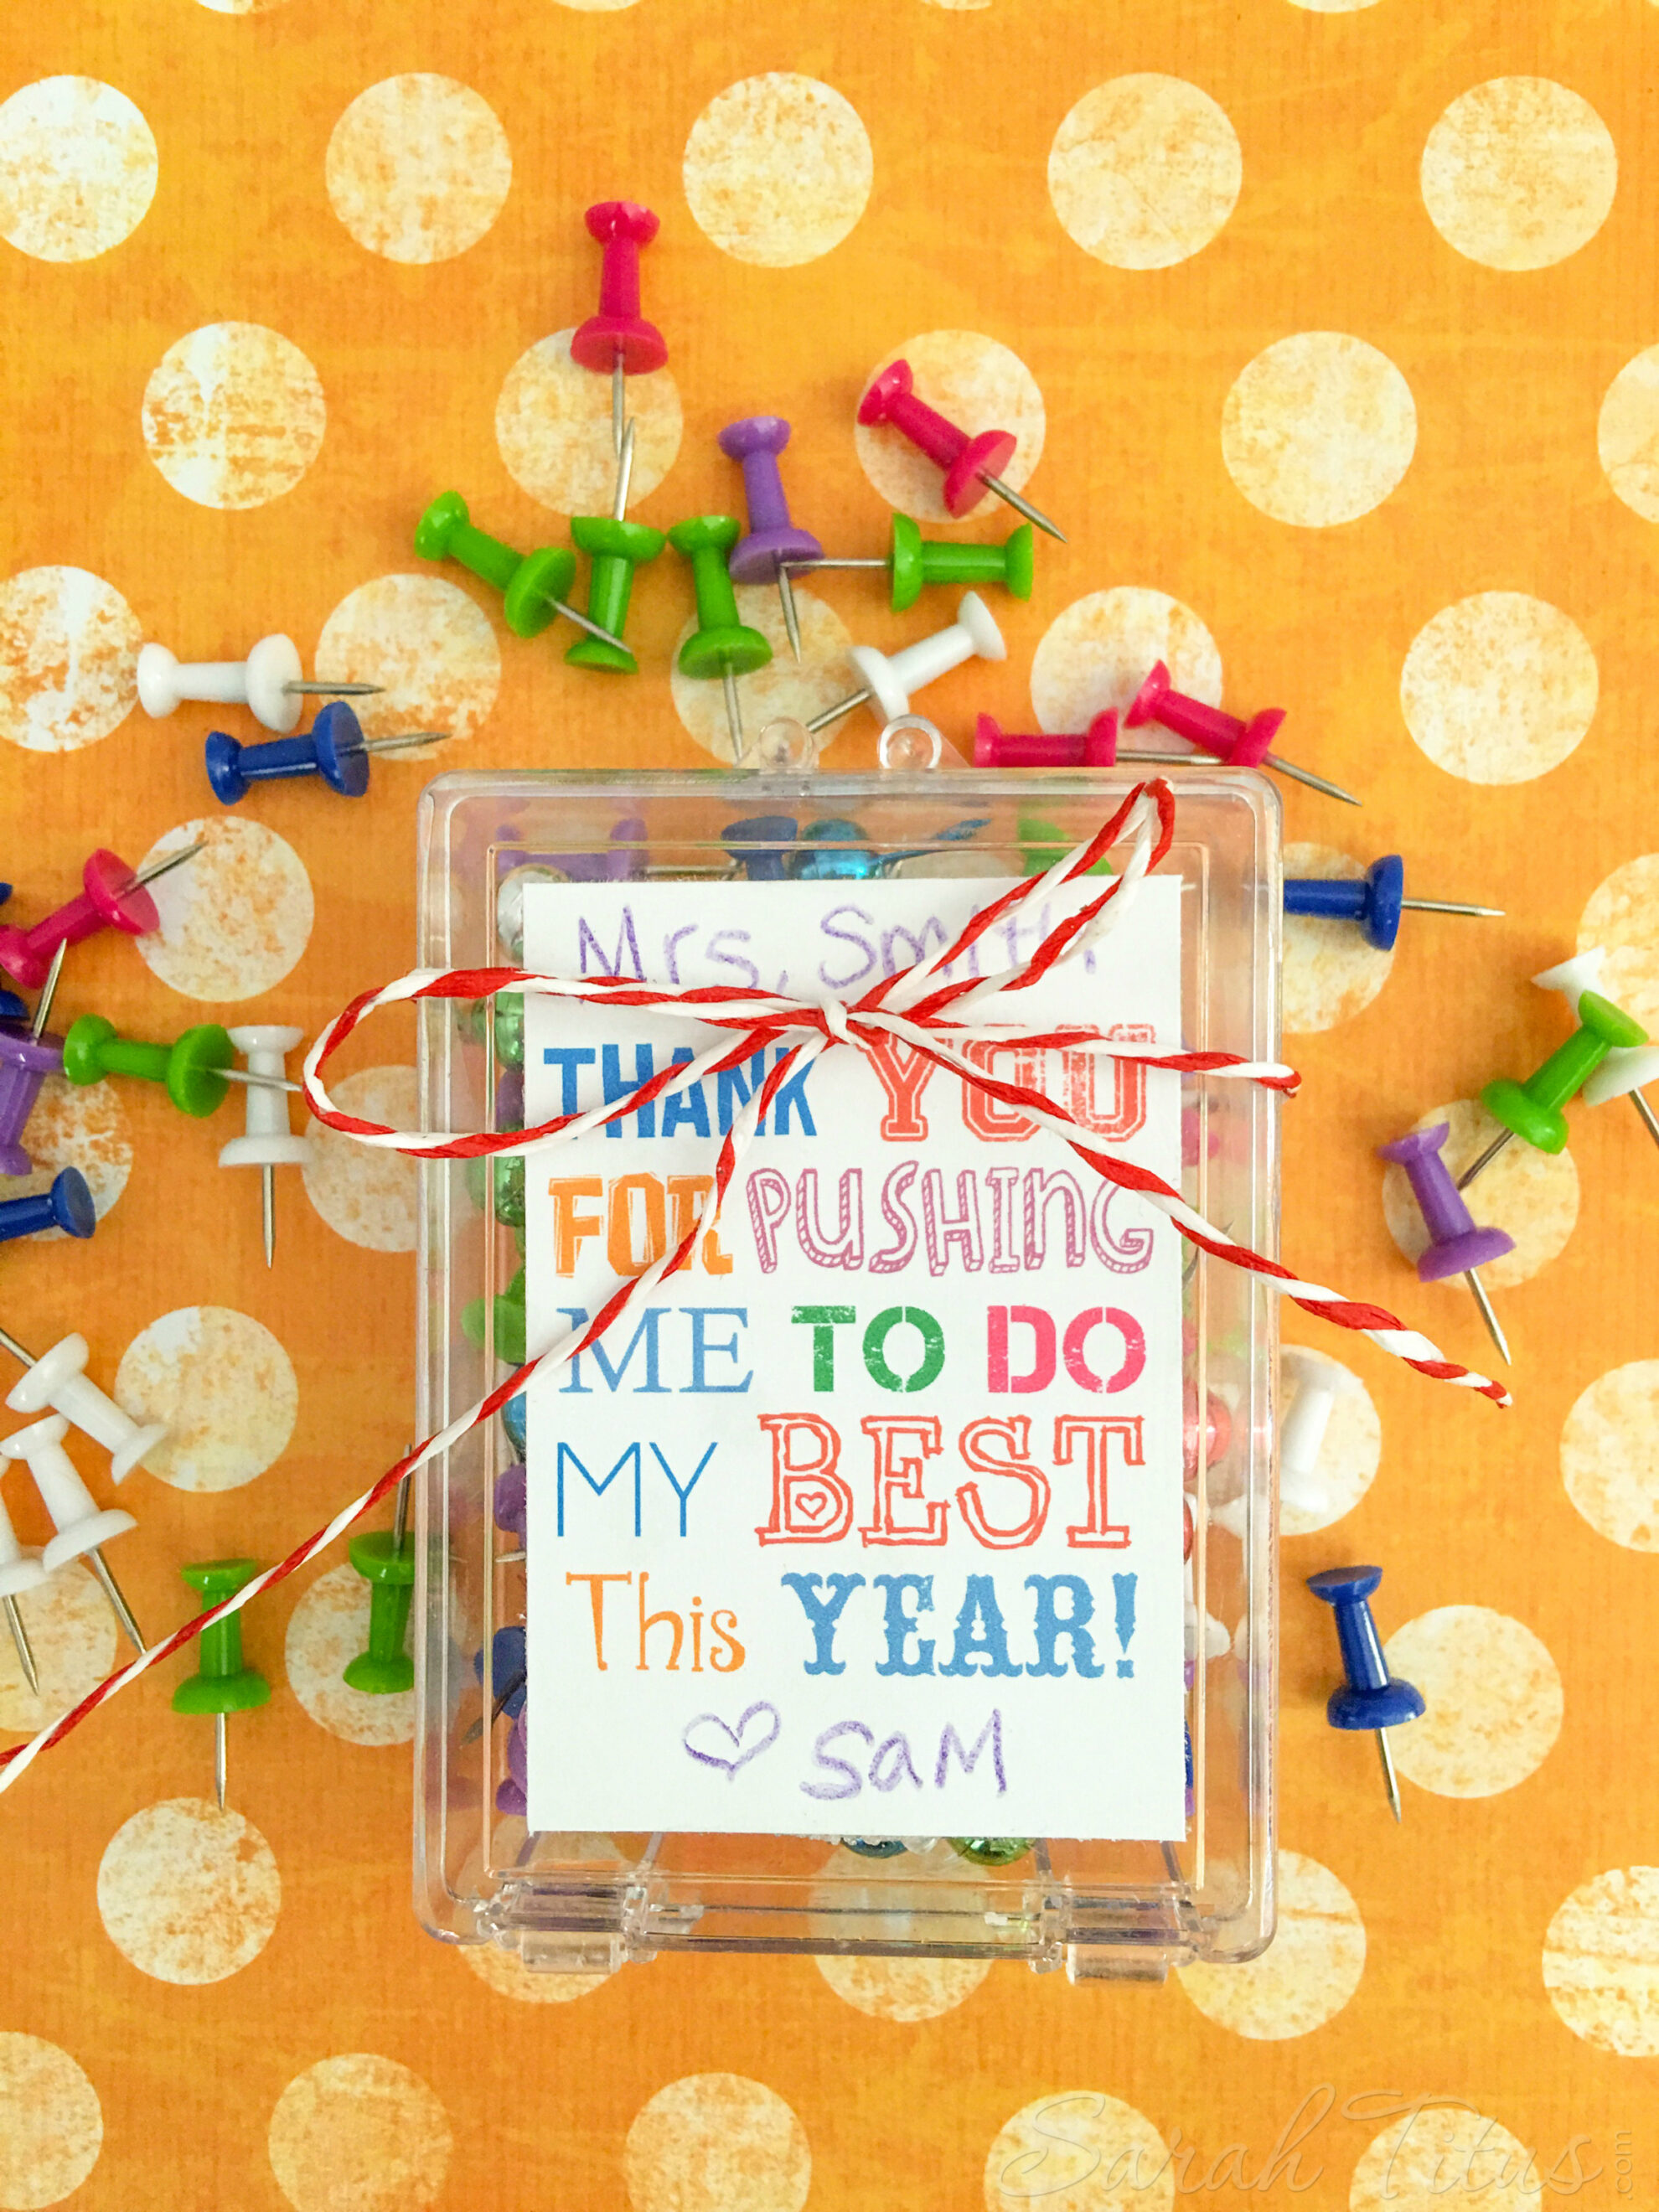 Show your appreciation with this cute & easy to make teacher appreciation gift idea free printable - thank you for pushing me to do my best this year!